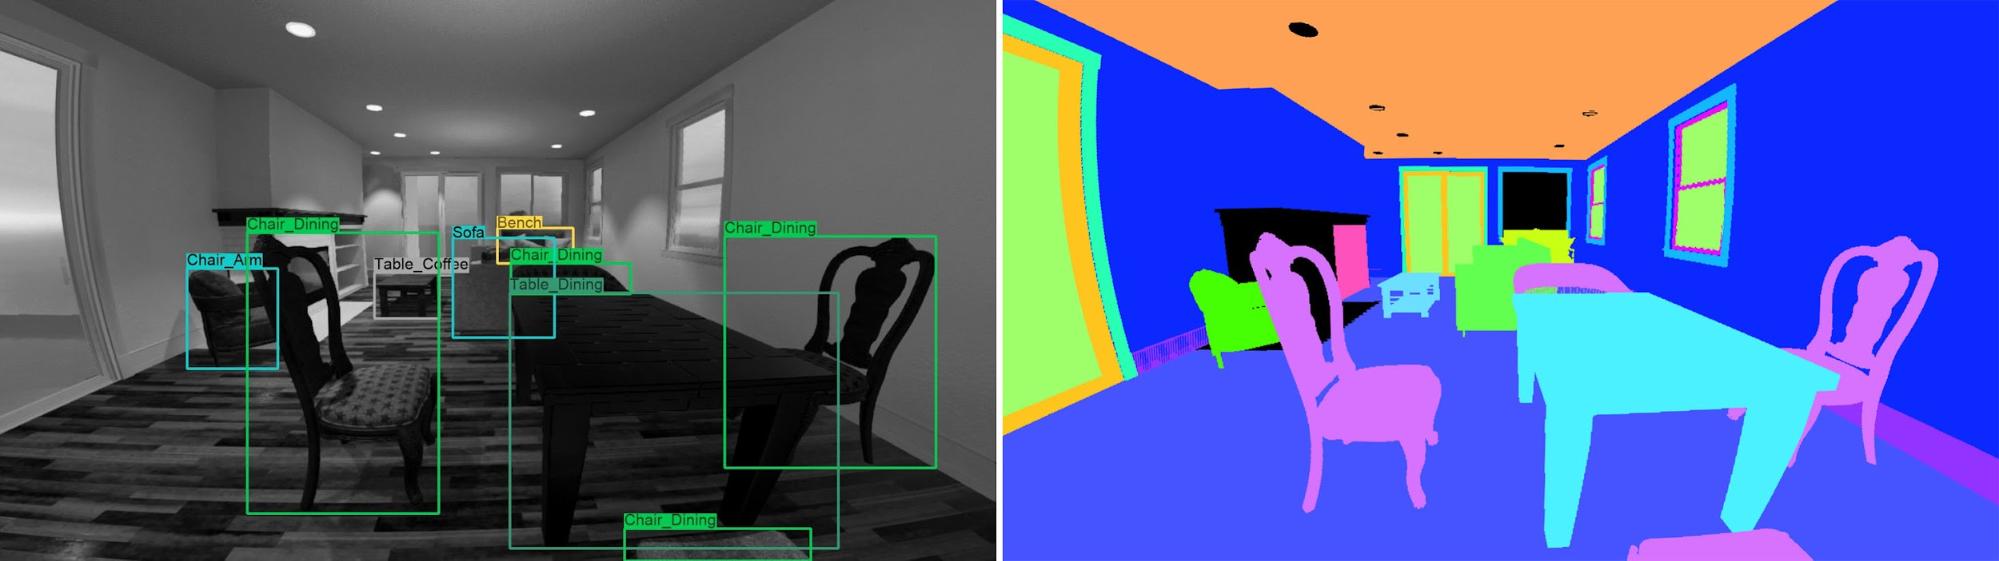 Simulating a night vision camera with a fisheye lens. Left: 2D bounding boxes, Right: semantic segmentation